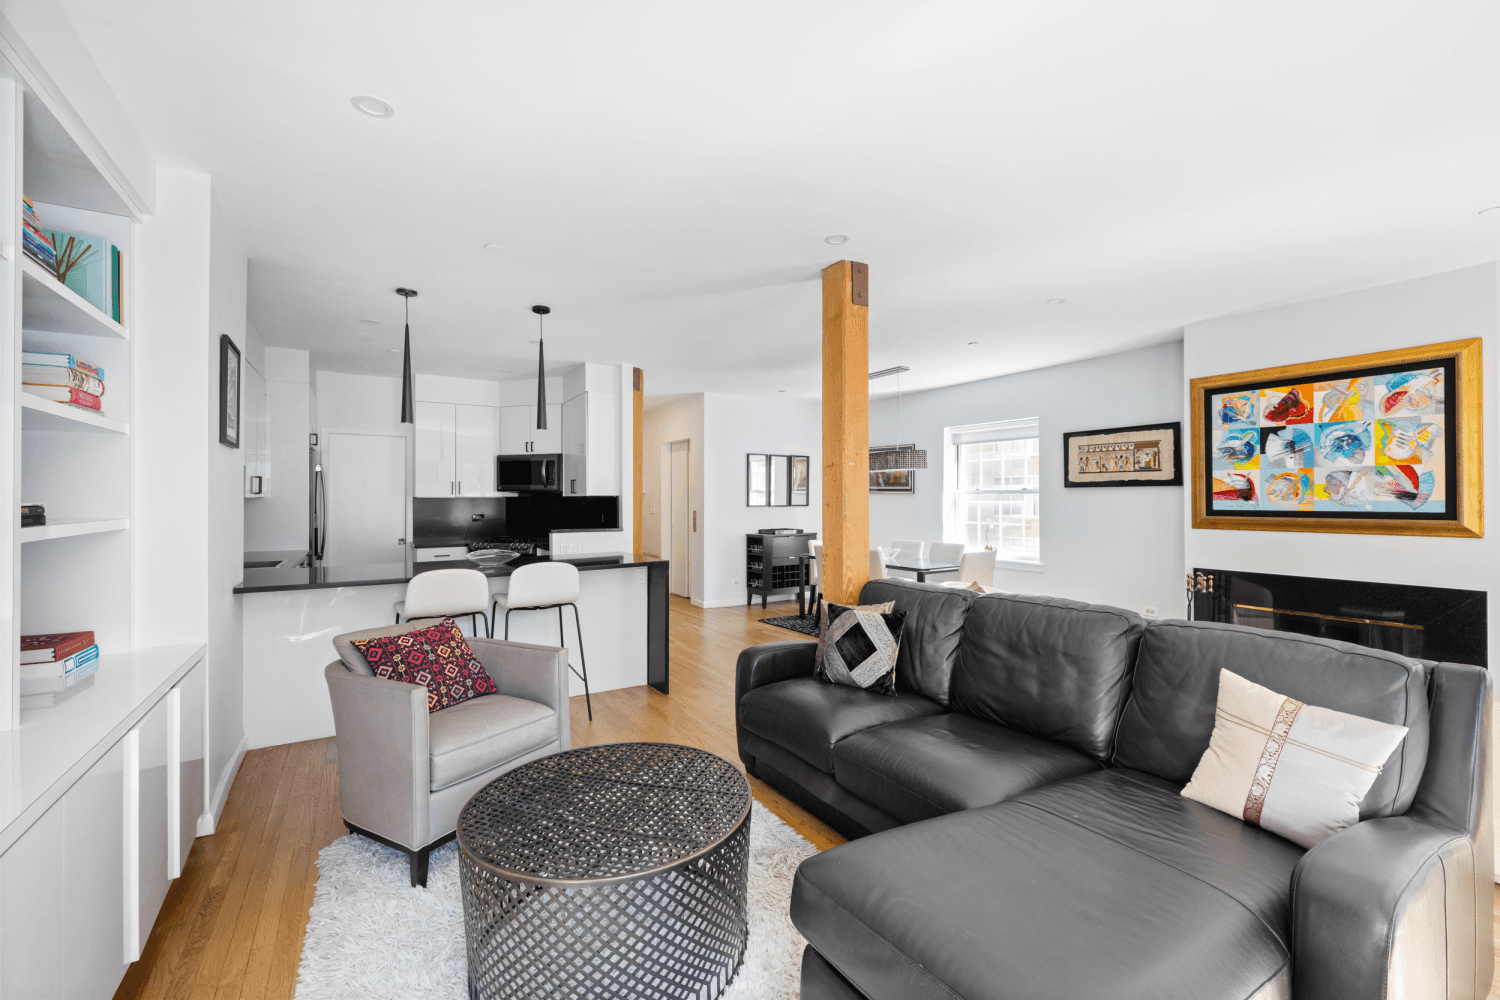 Experience the perfect blend of modern comfort and timeless charm of the West Village, in this sunsplashed 2 bedroom, 2 bathroom apartment.